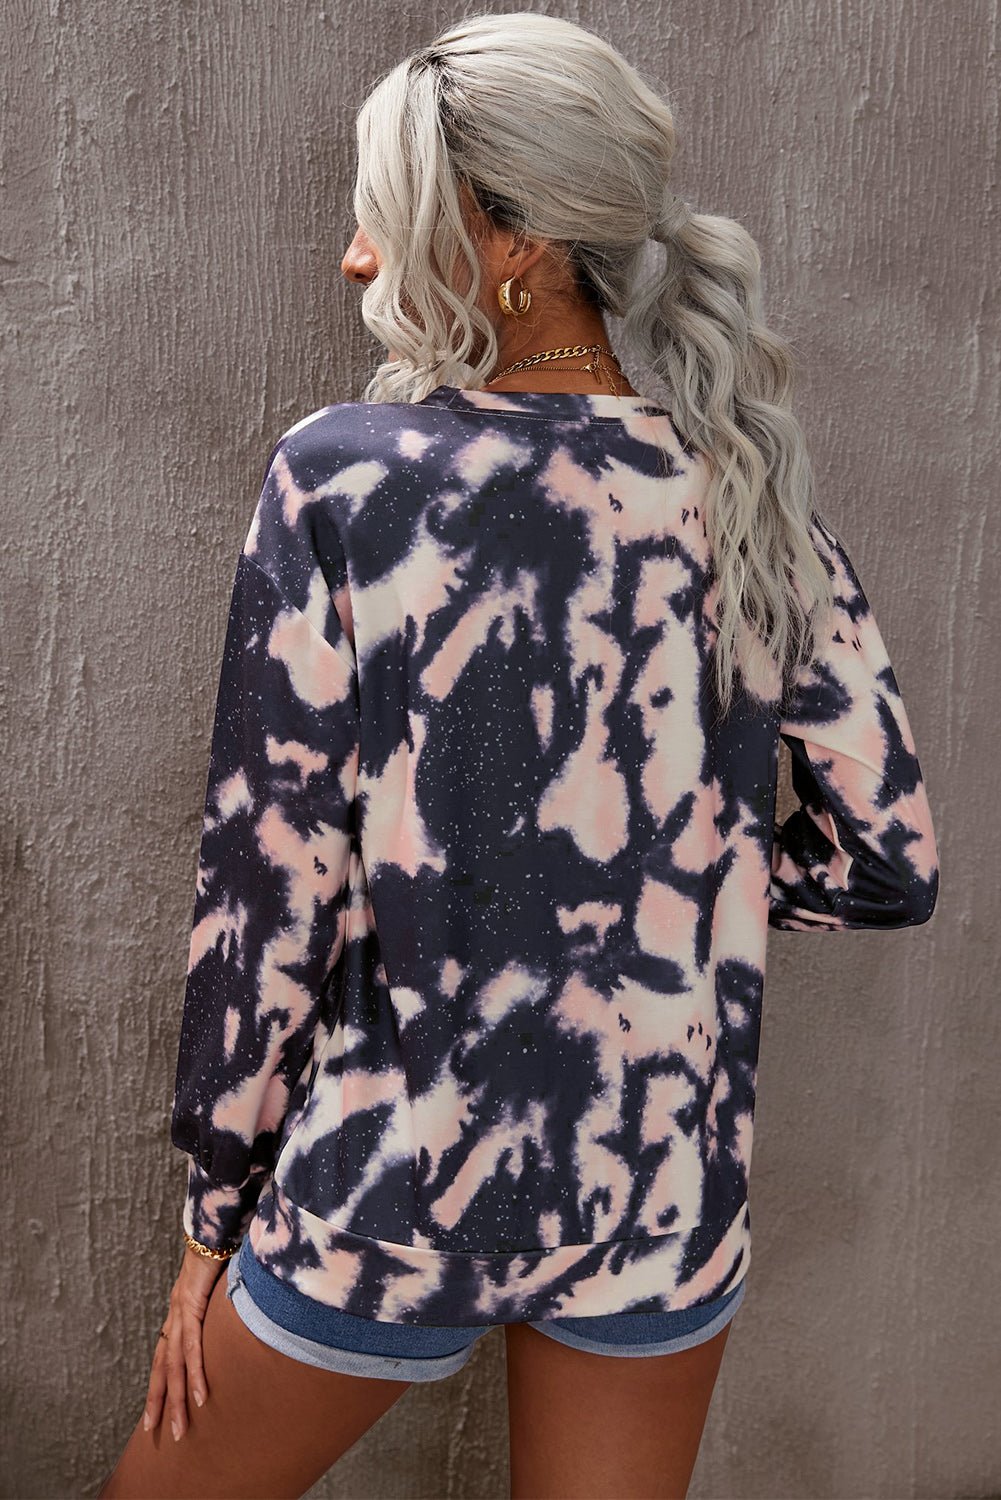 "Bohemian Dreams - Unleash Your Inner Flower Child with our Tie-Dye Round Neck Dropped Shoulder Sweatshirt" - Guy Christopher